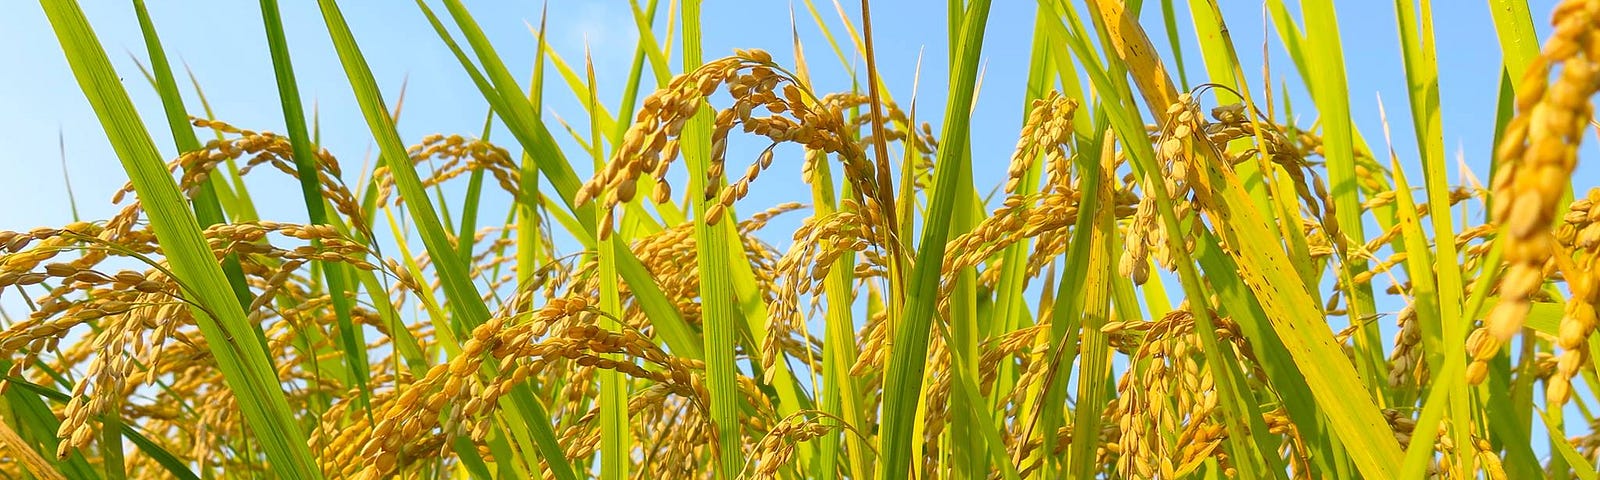 Golden heads of ripened rice, bowing beneath a blue sky.